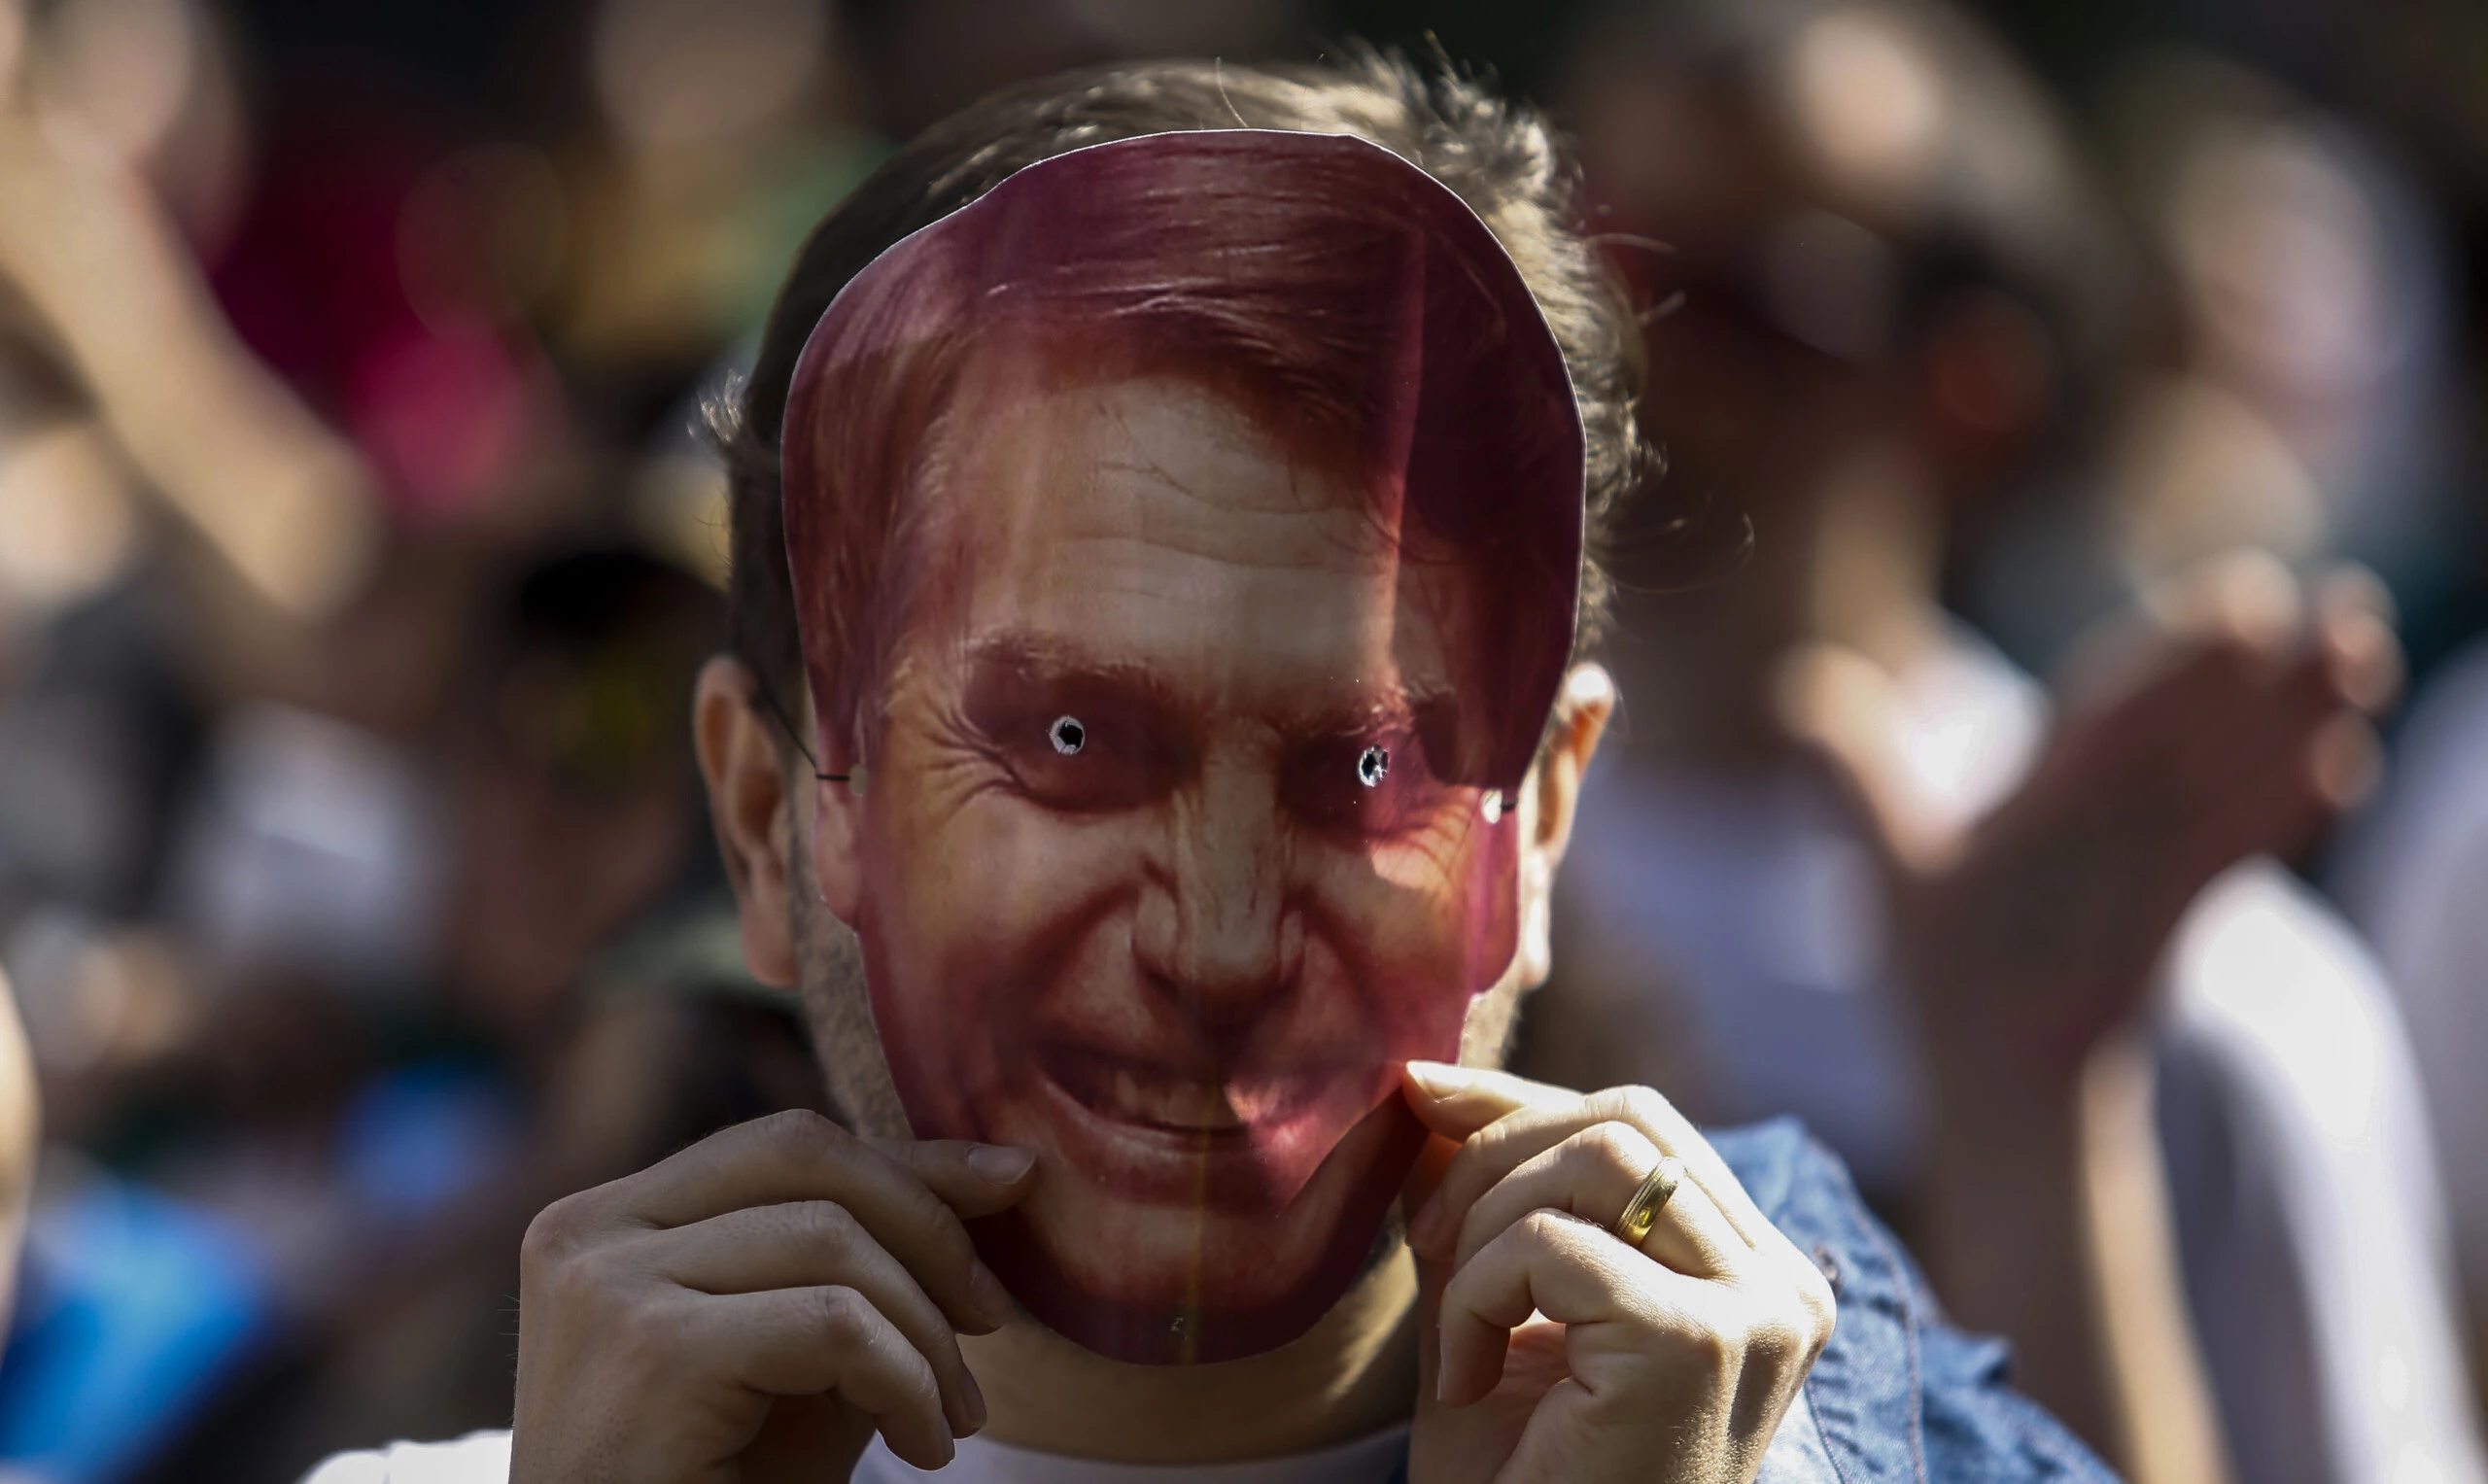 A supporter of Brazilian right-wing presidential candidate Jair Bolsonaro wears a mask of him during a rally at Paulista Avenue in Sao Paulo, Brazil on September 09, 2018. - Supporters of far-right presidential candidate Jair Bolsonaro demonstrated in support of the frontrunner on Sunday, who is convalescing after being stabbed while campaigning several days before. Bolsonaro is hospitalized in the Albert Einstein Hospital in Sao Paulo, which said Sunday that his condition is improving but that he was still receiving nutrients intravenously. (Photo by Miguel SCHINCARIOL / AFP)        (Photo credit should read MIGUEL SCHINCARIOL/AFP/Getty Images)